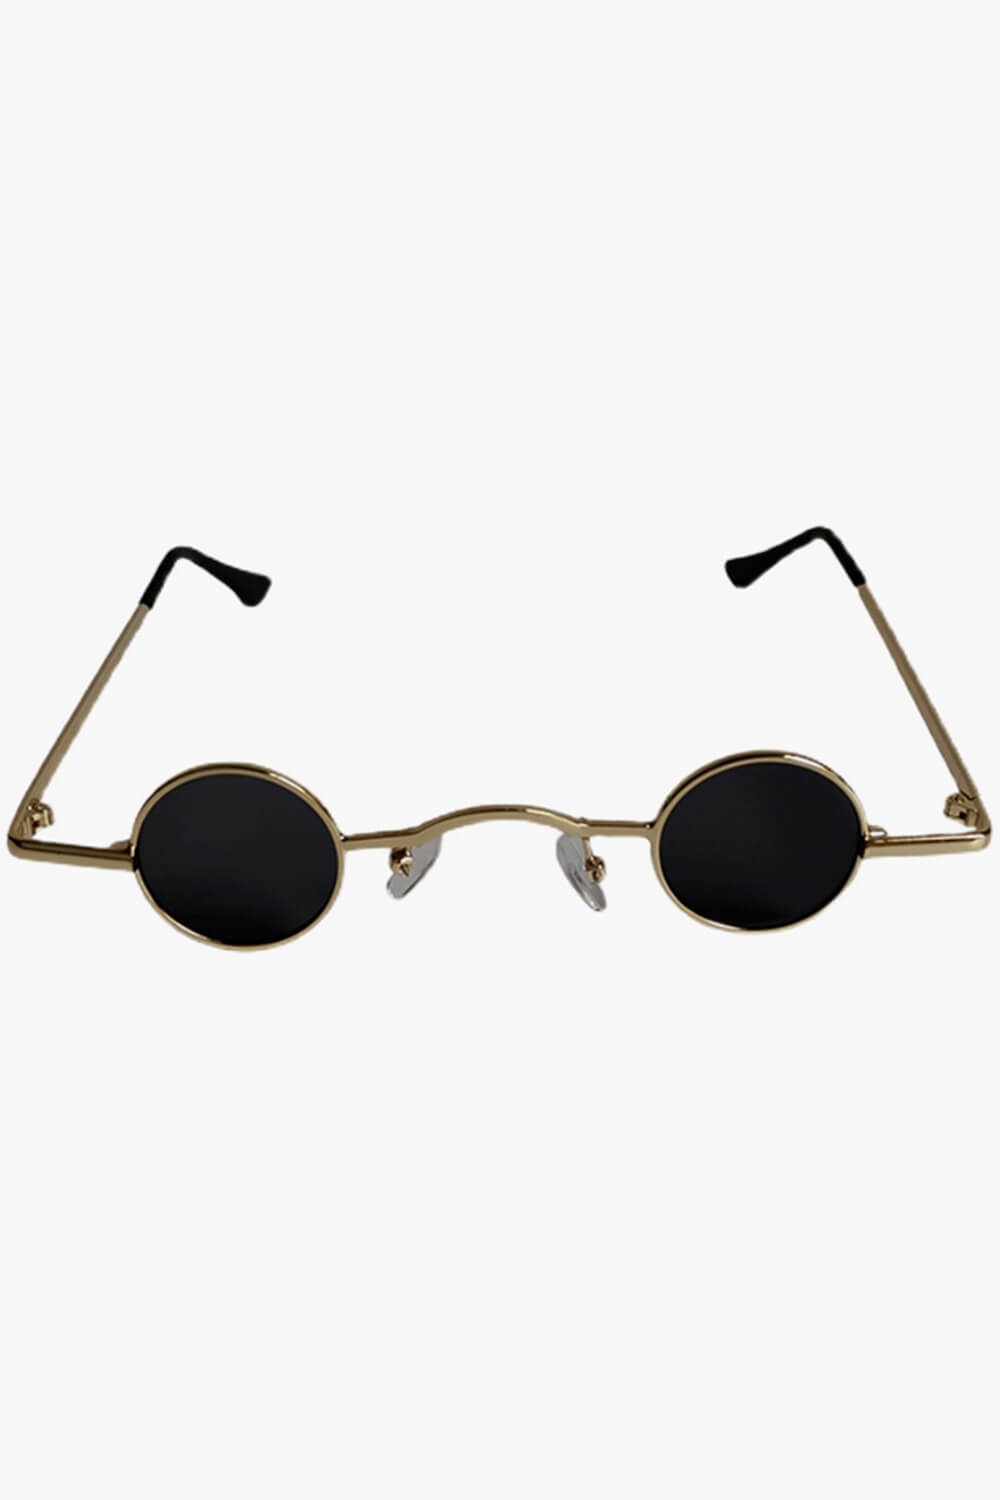 Small Round Retro Cryptid Glasses - Aesthetic Clothes Shop